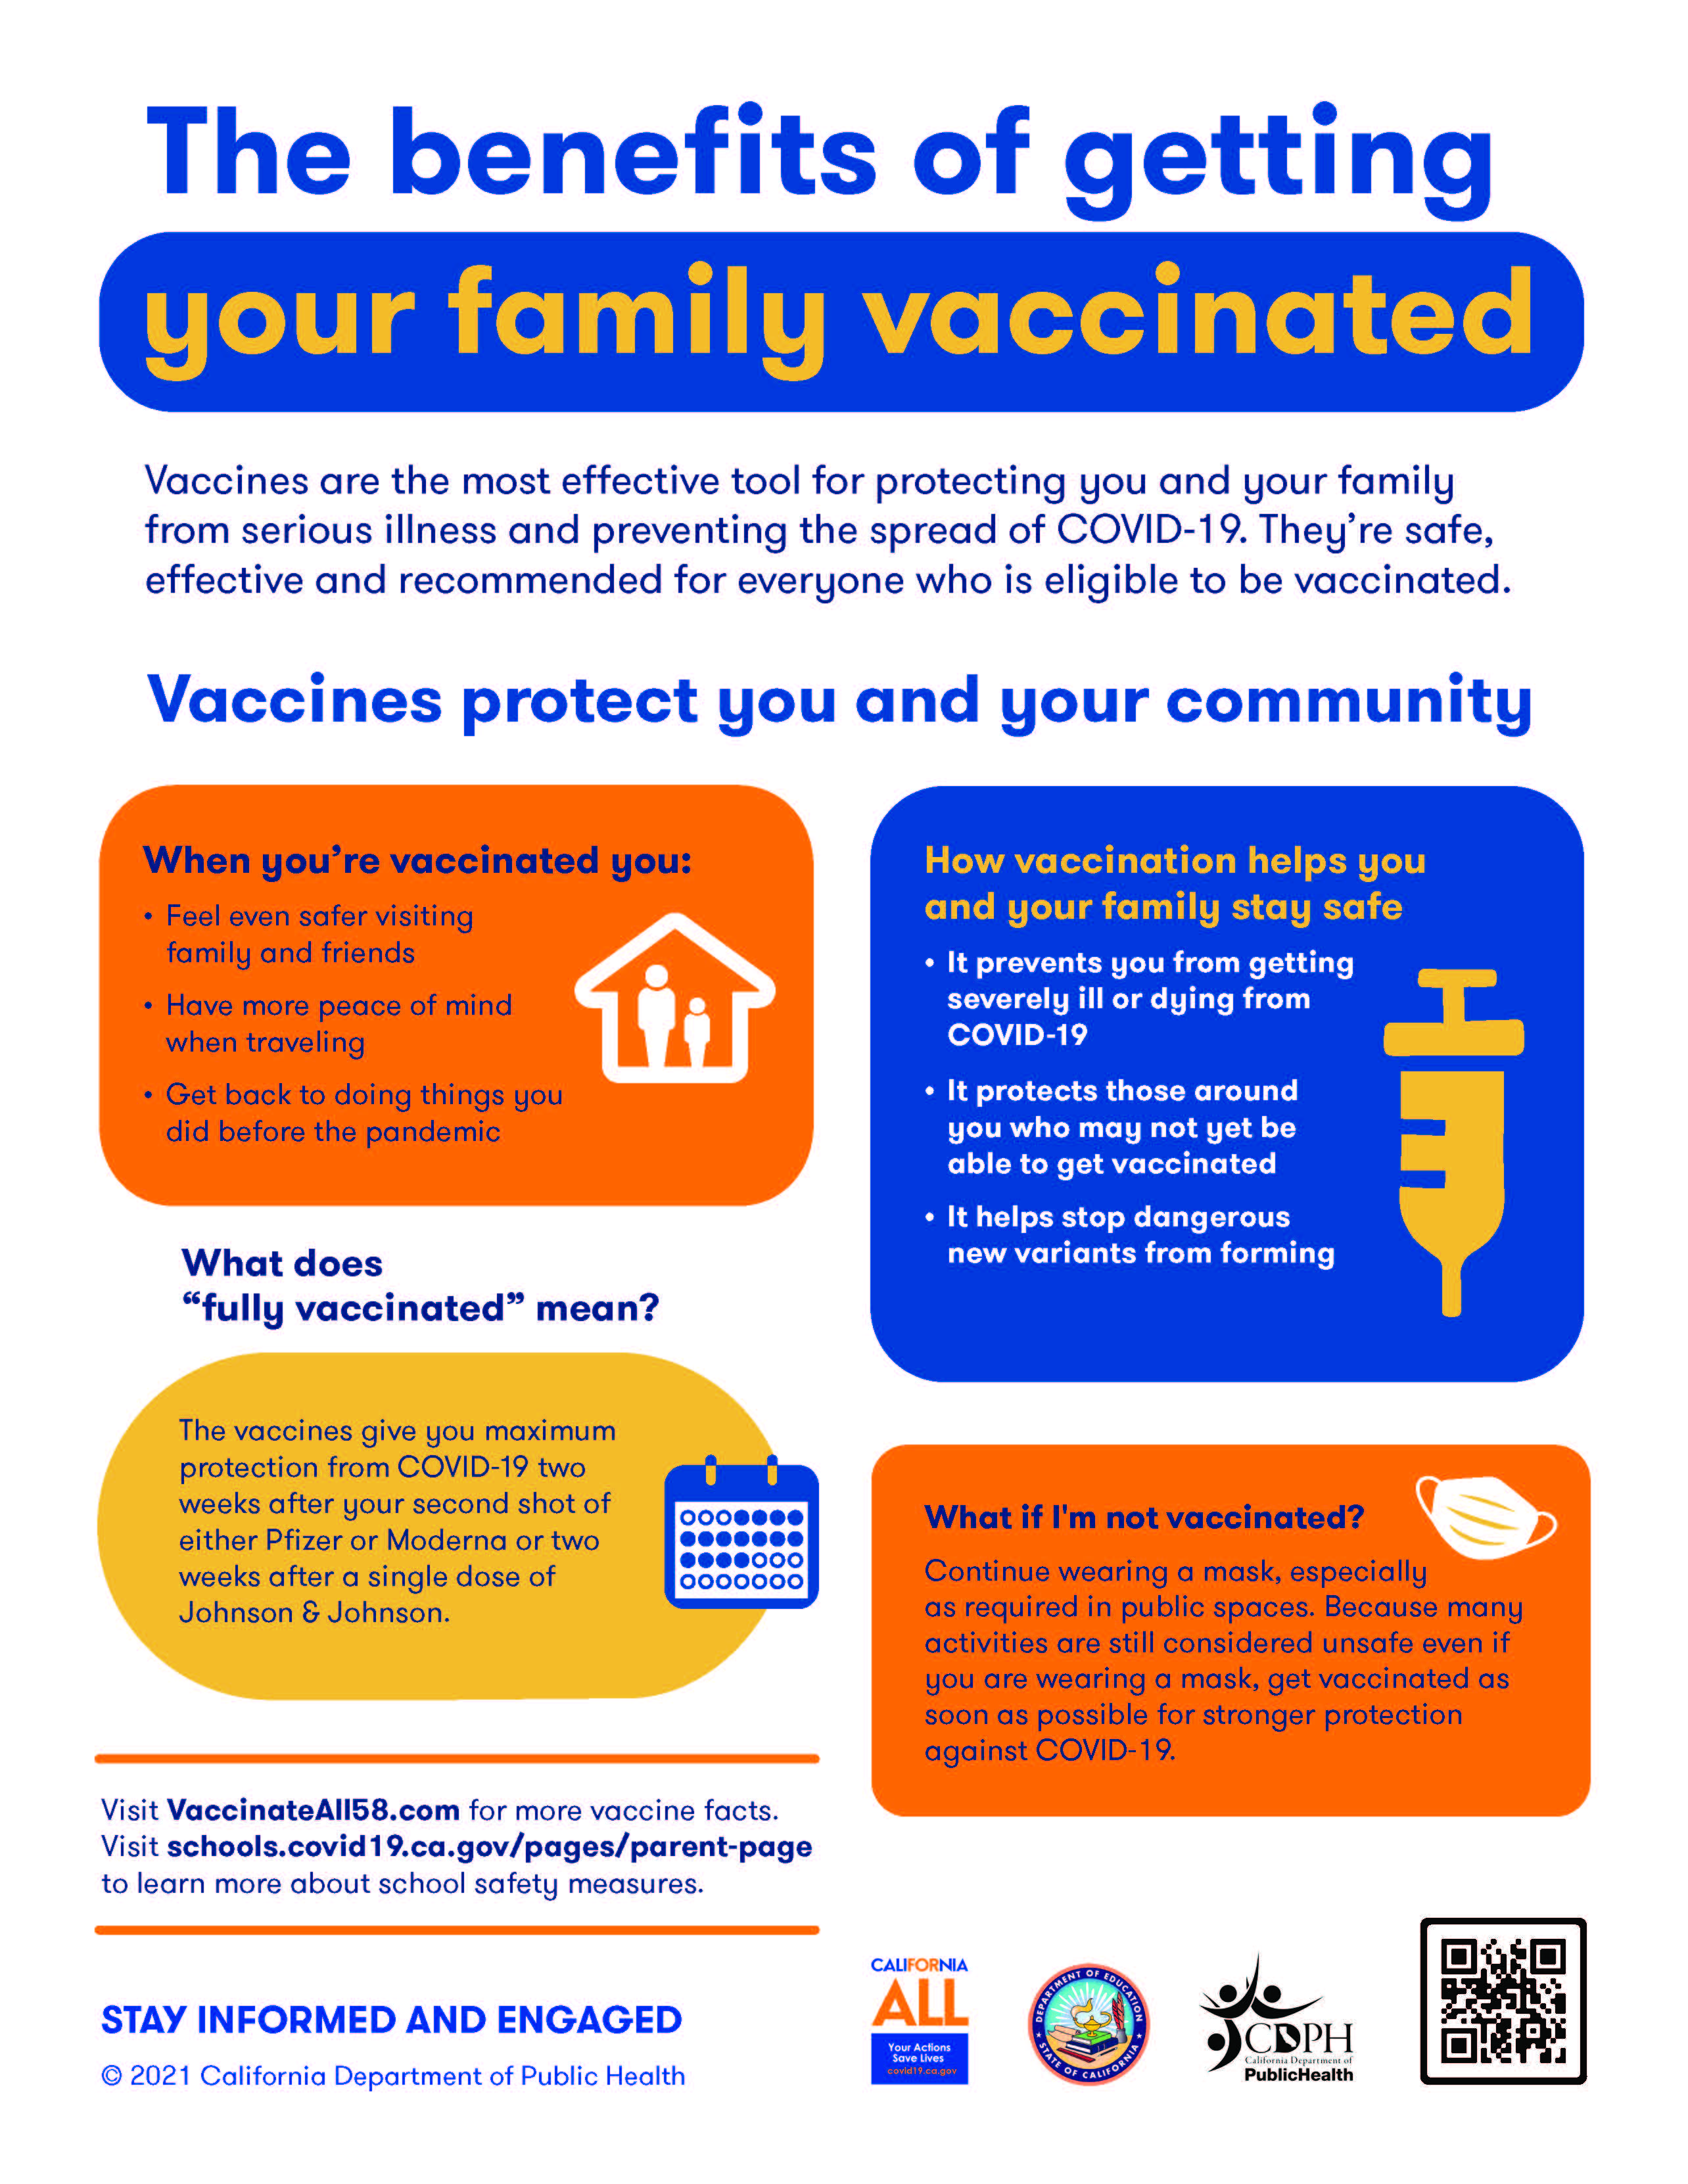 The benefits of getting your family vaccinated. © 2021 California Department of Public Health